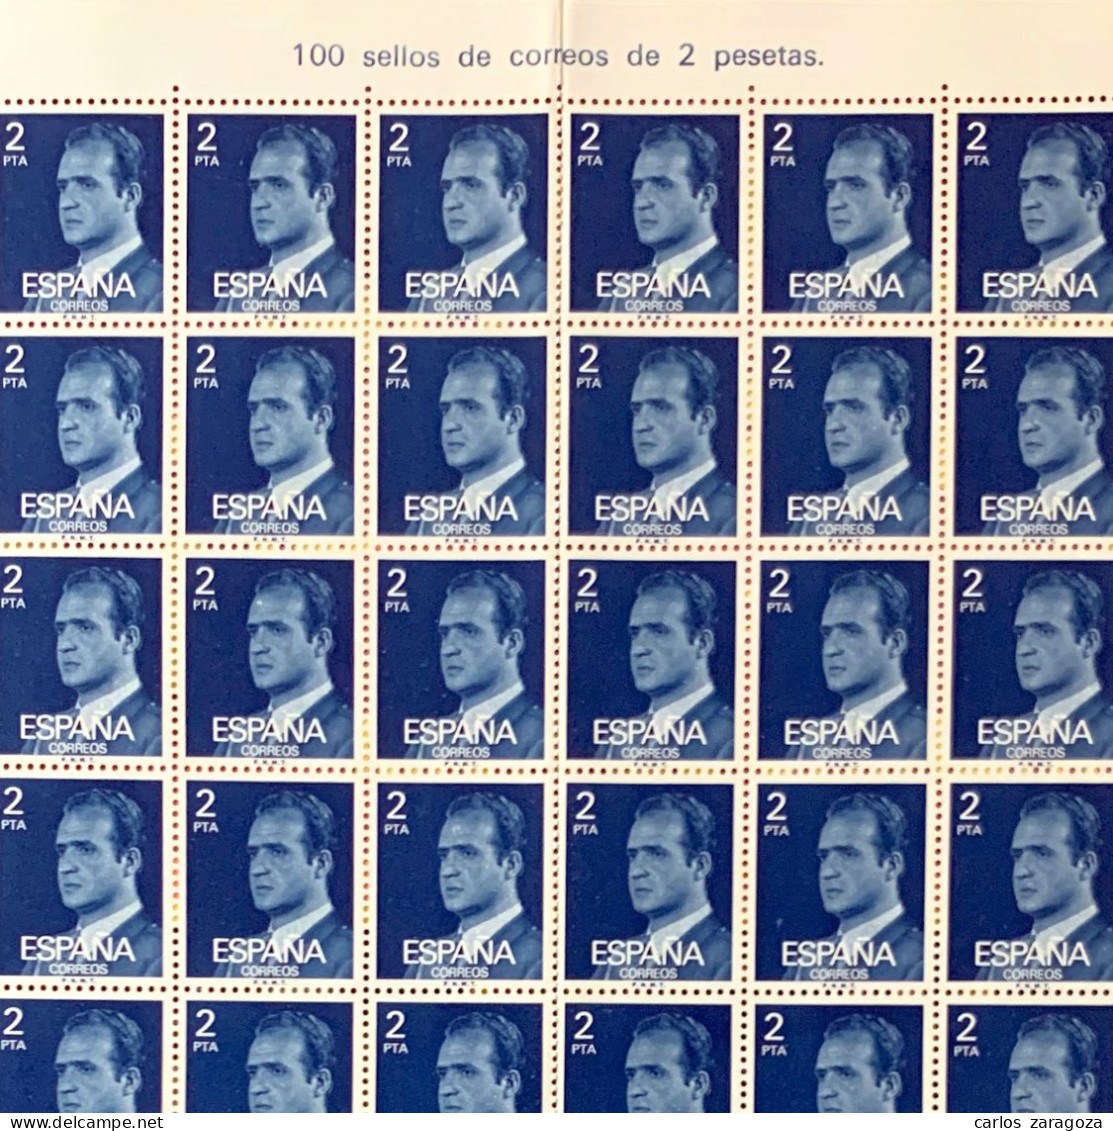 SPAIN 1976—KING JUAN CARLOS #1975—COMPLETE SHEET 100 MNH STAMPS—DEFINITIVE ISSUE—ESPAGNE Feuille Yt 1991 Timbres Neufs - Fogli Completi